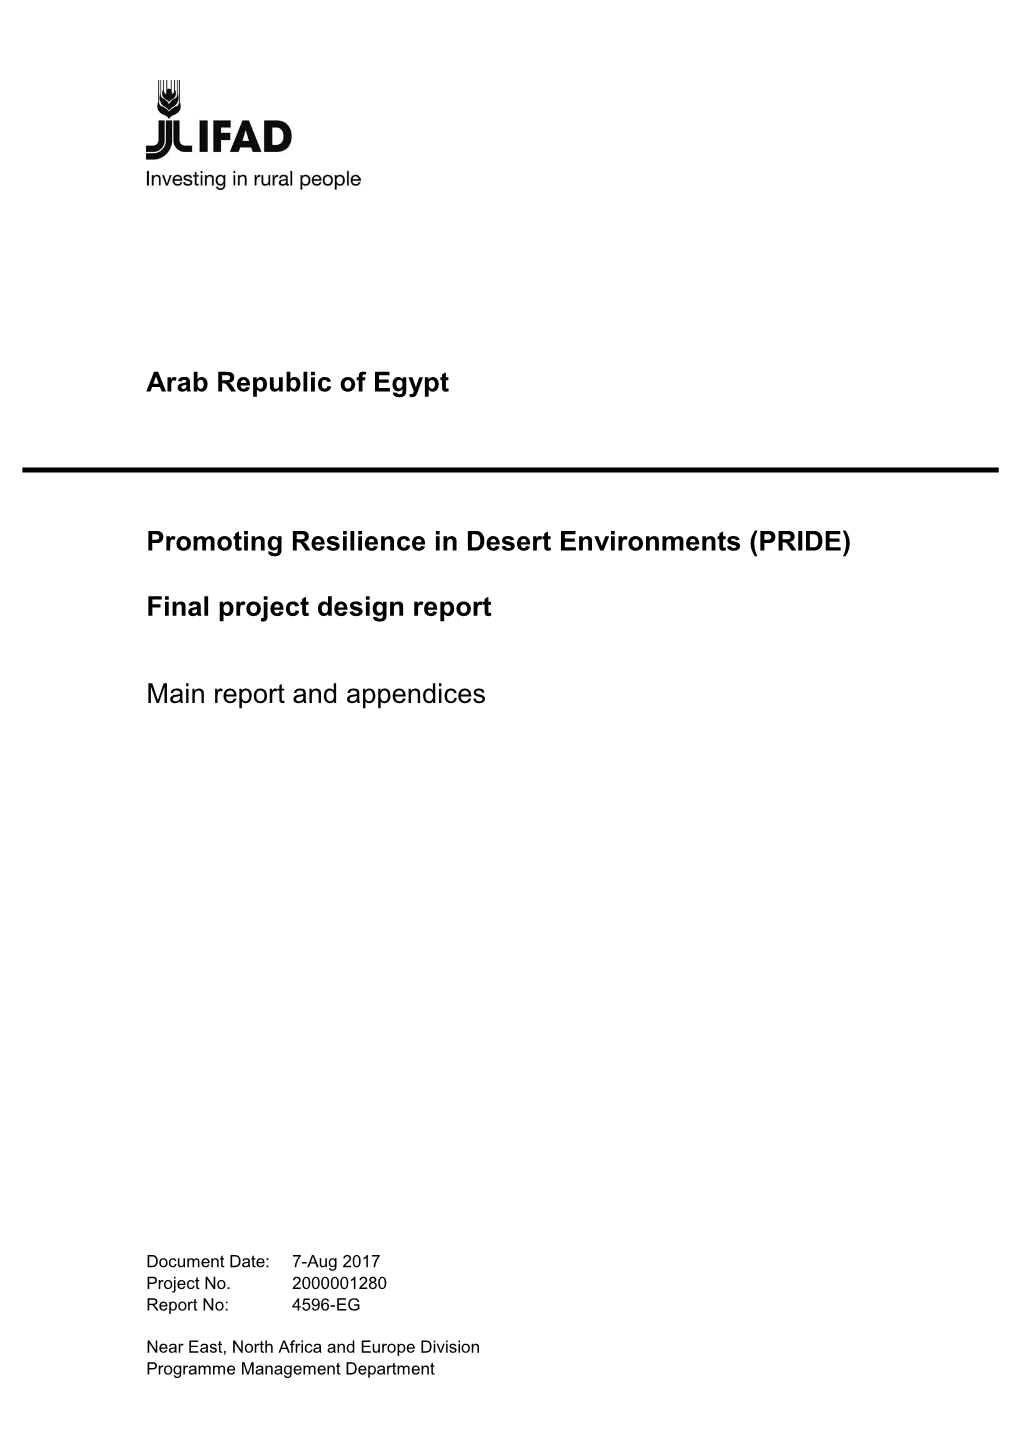 Promoting Resilience in Desert Environments (PRIDE)